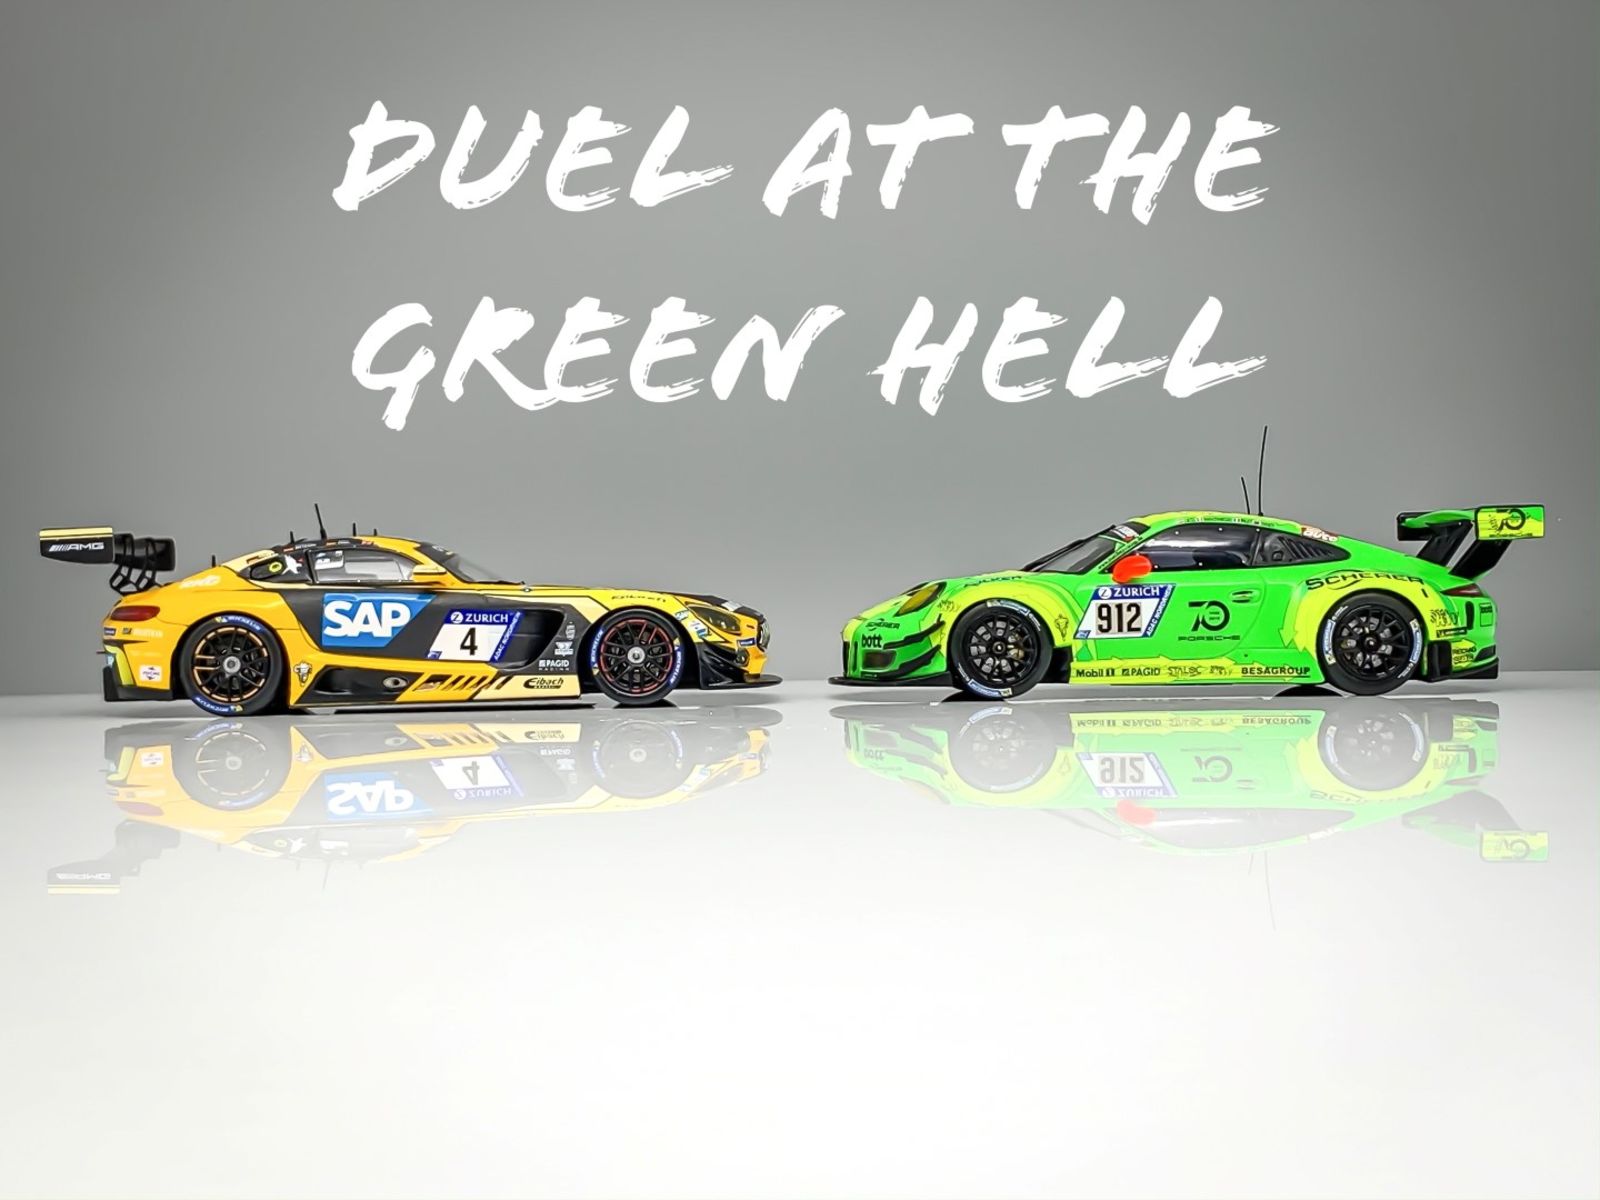 Illustration for article titled DUEL AT THE GREEN HELL